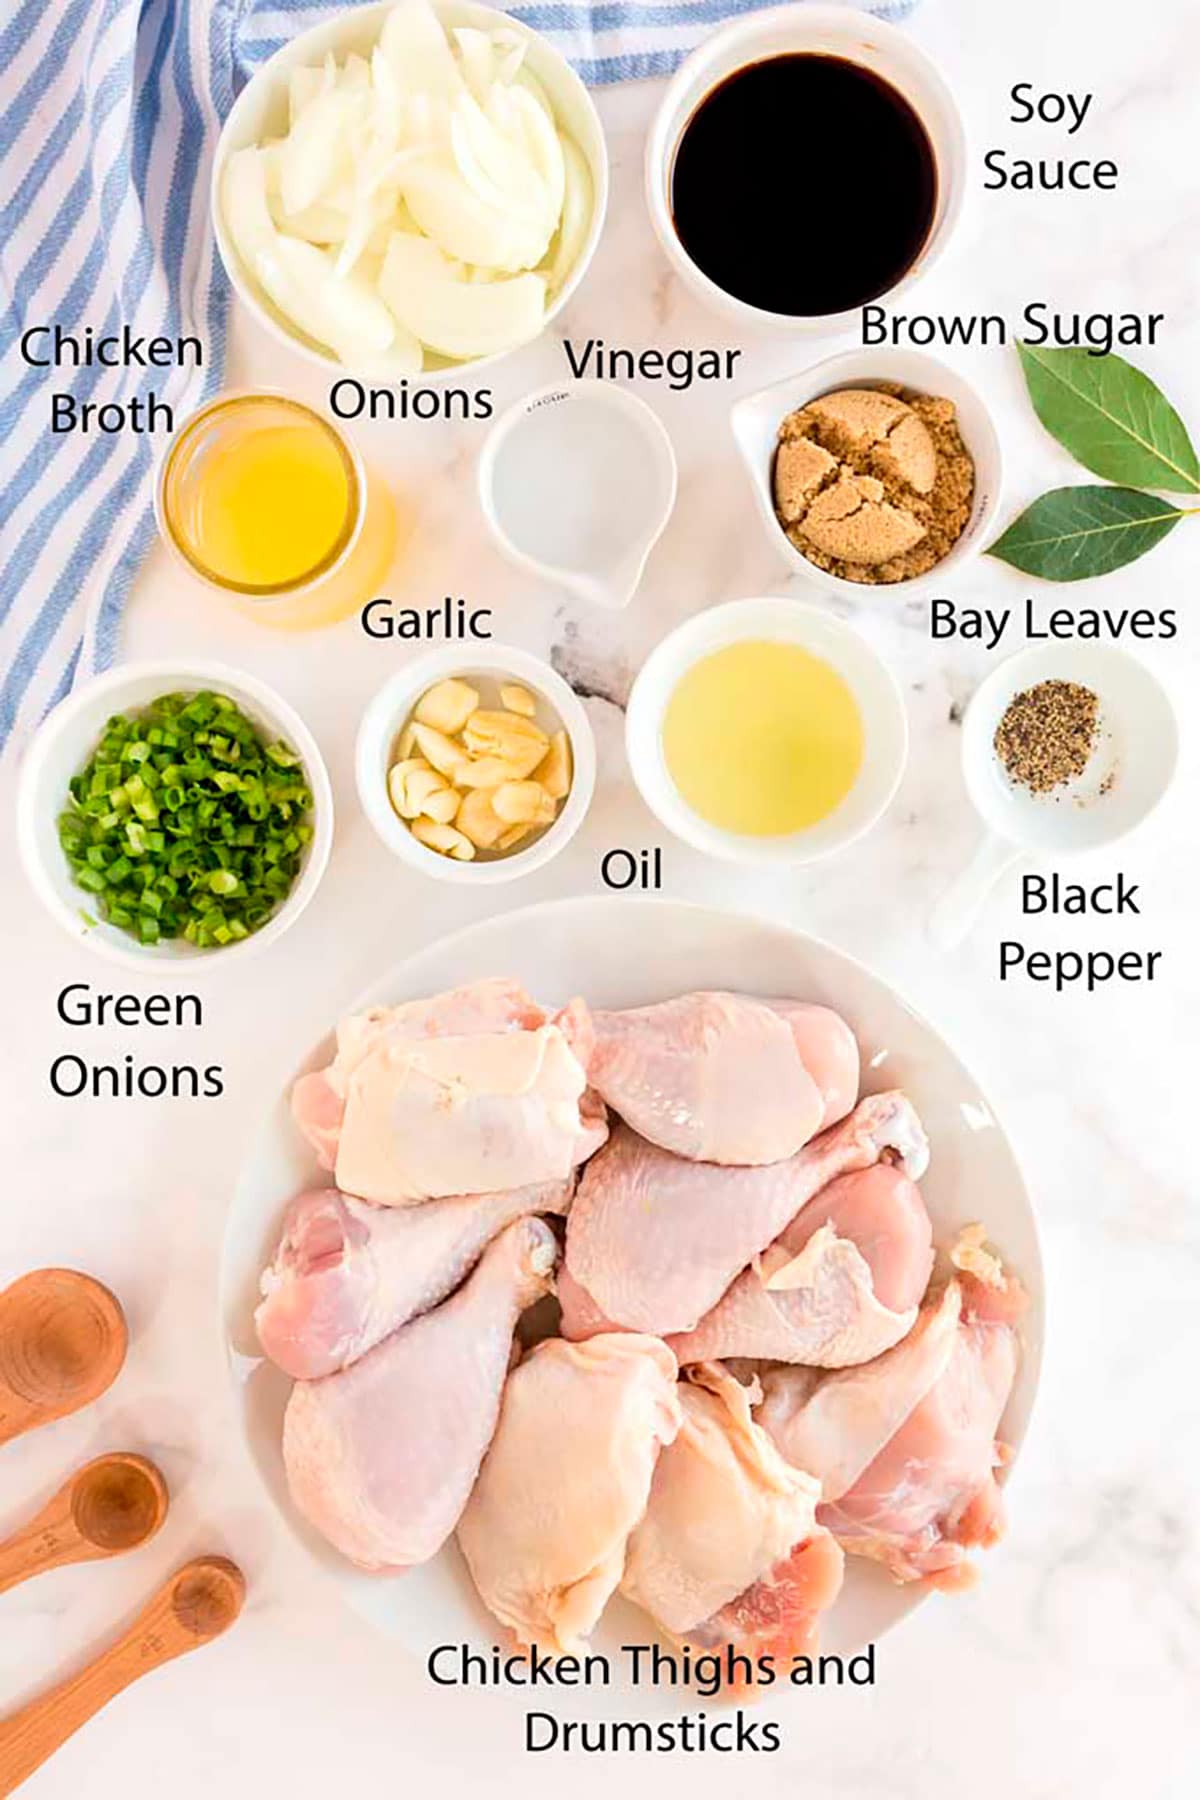 Ingredients to make chicken adobo from the Philippines.